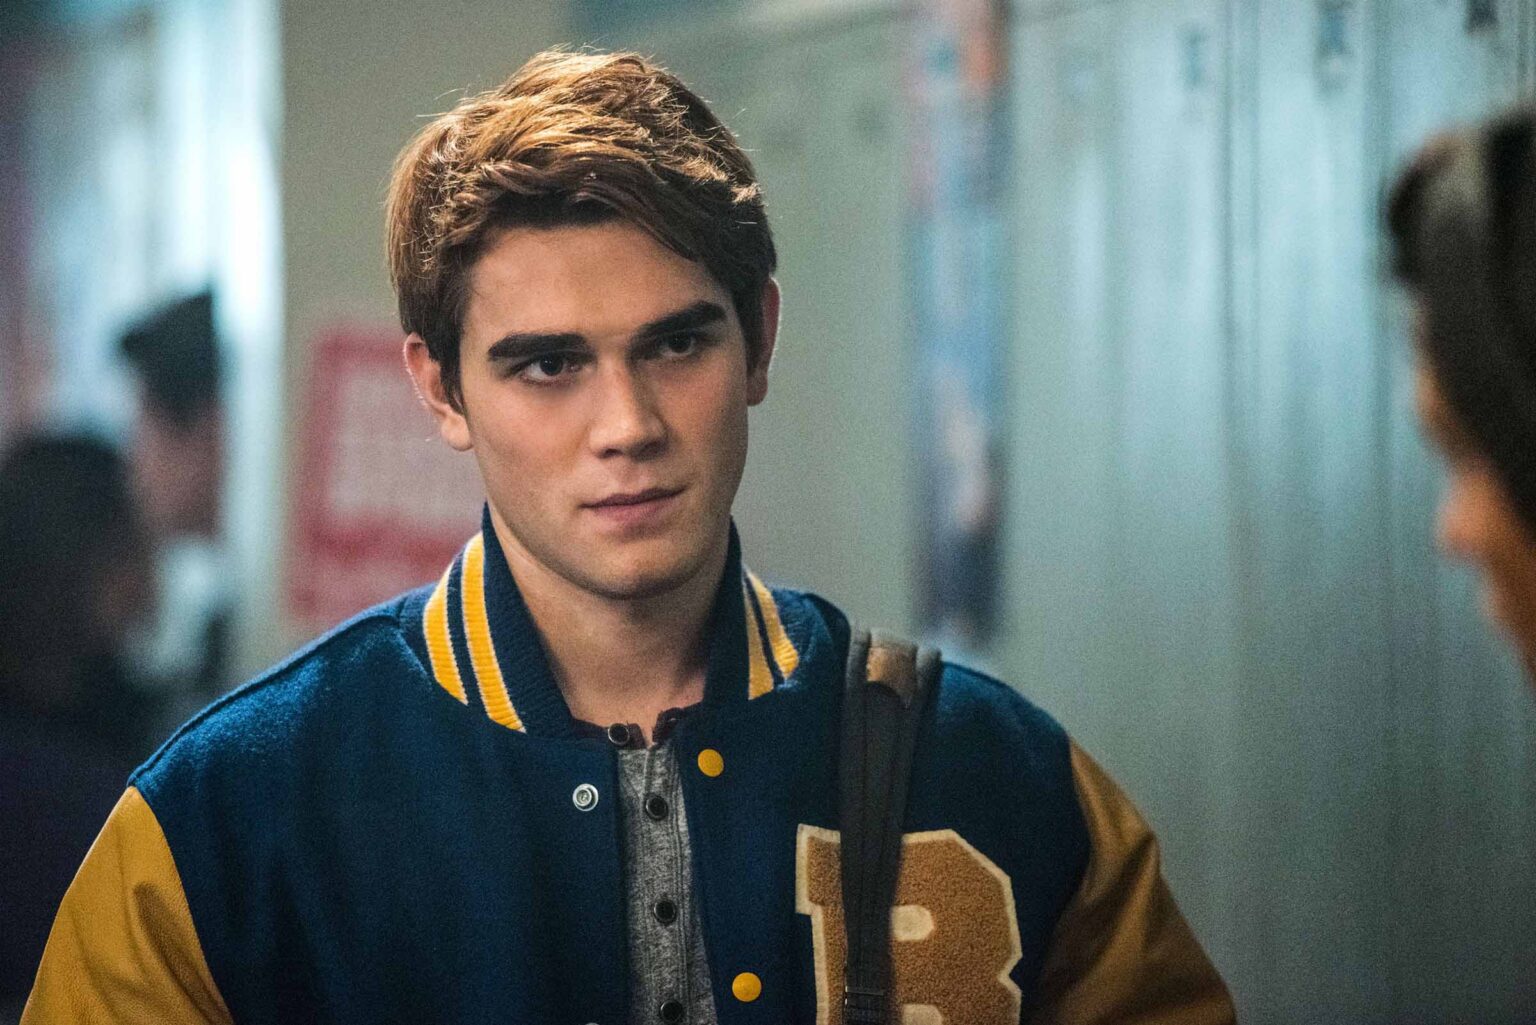 This season of 'Riverdale' has really not helped those arguing the show isn’t trash. Here's what we think will happen to Archie in the finale.